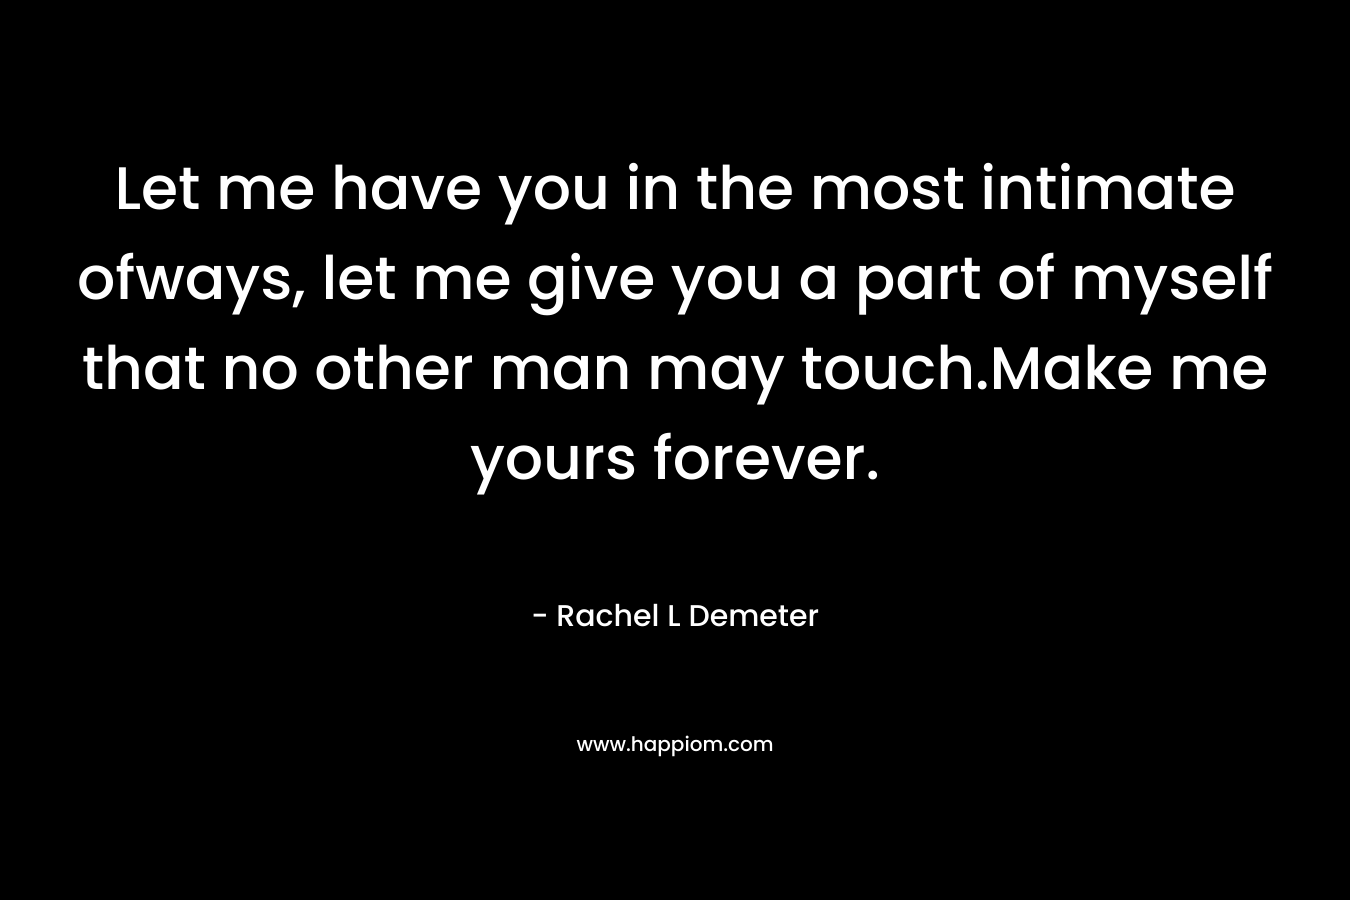 Let me have you in the most intimate ofways, let me give you a part of myself that no other man may touch.Make me yours forever. – Rachel L Demeter